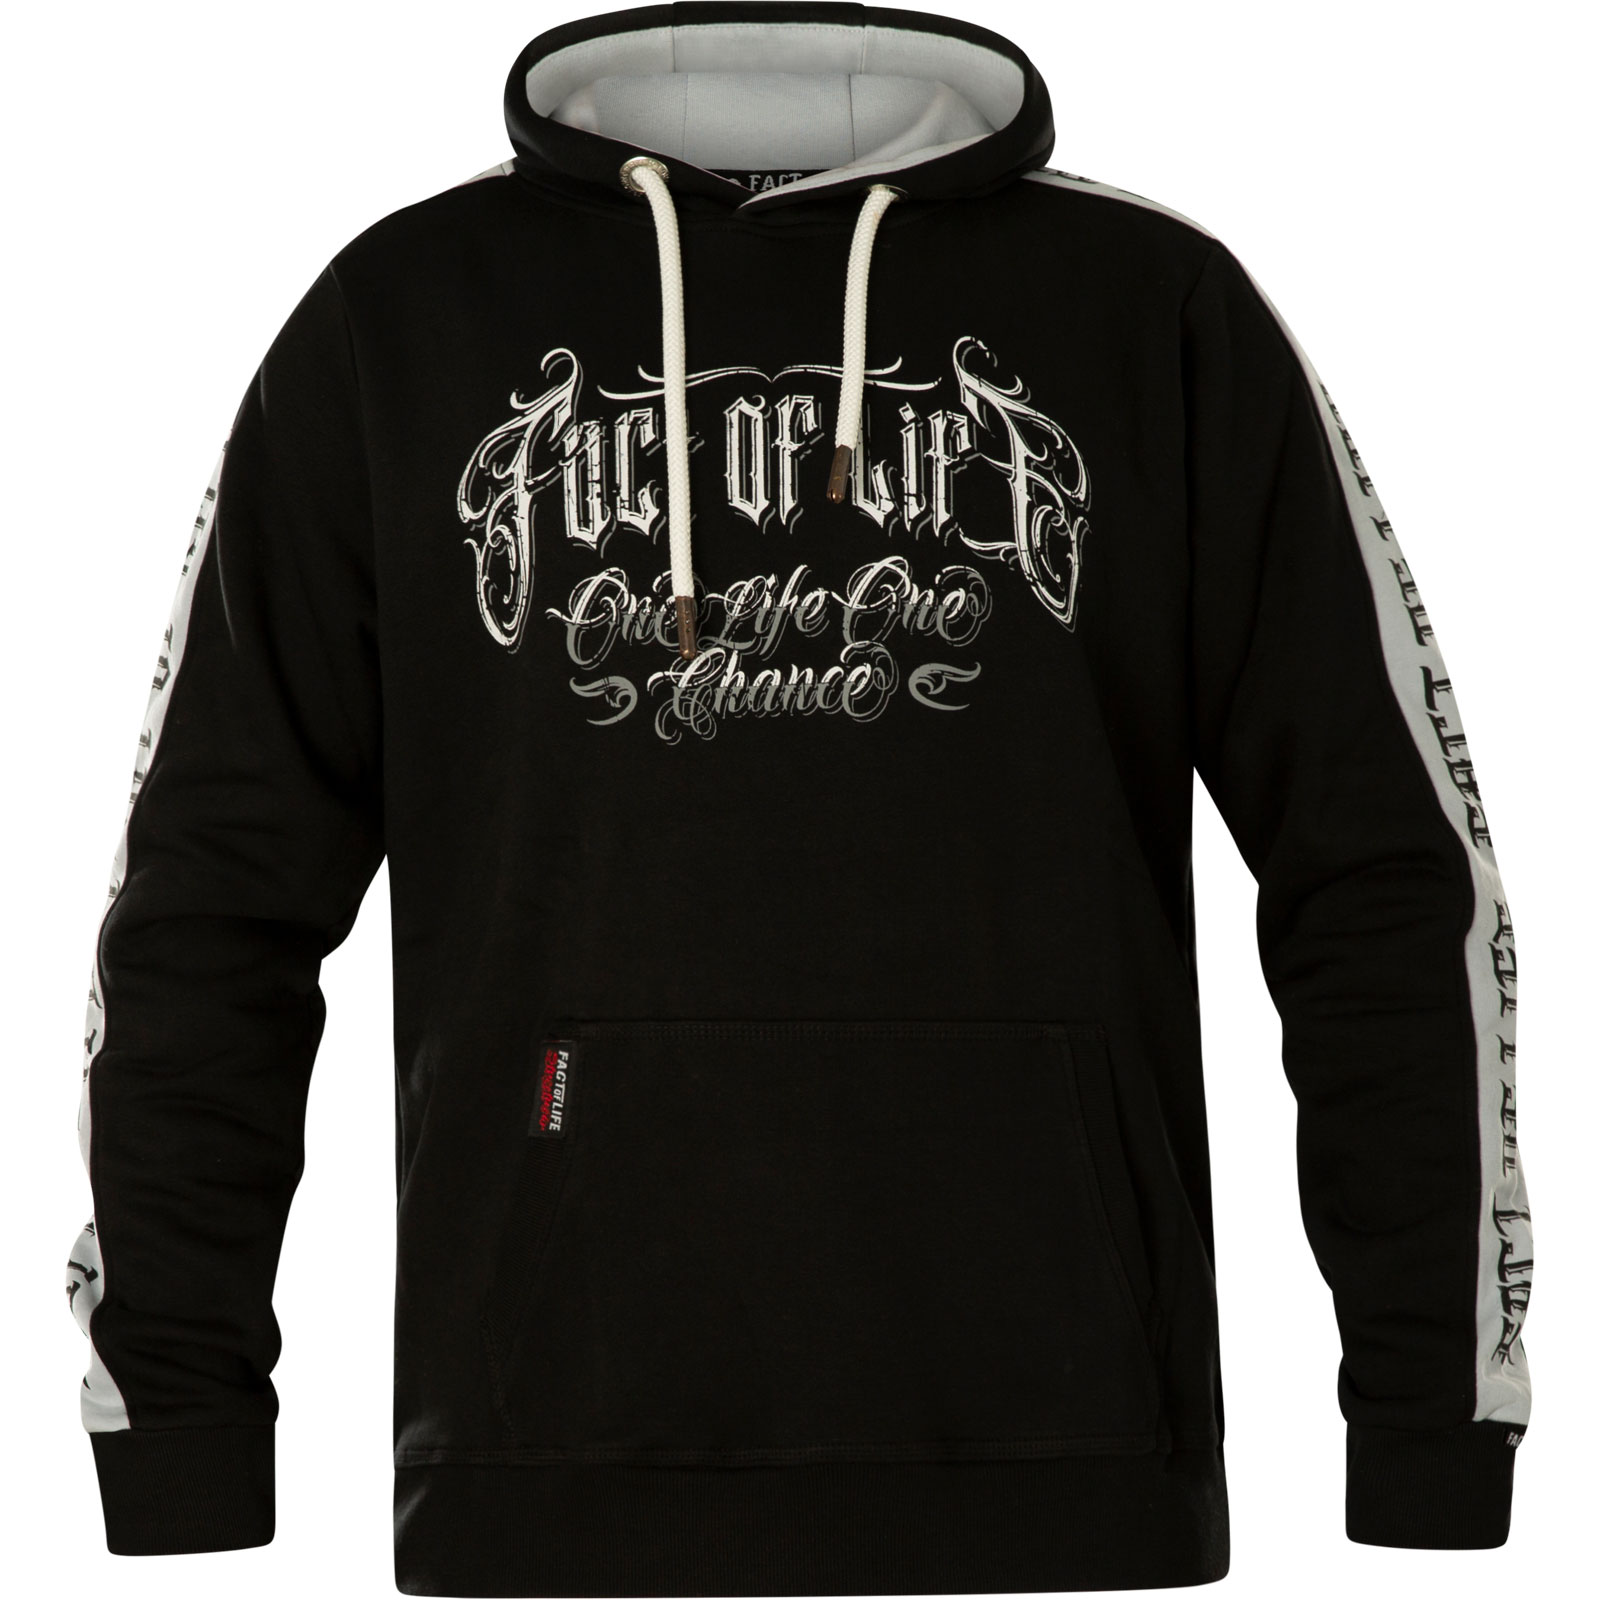 Fact Of Life Hoody One Chance, One Life SH-11 print and lettering